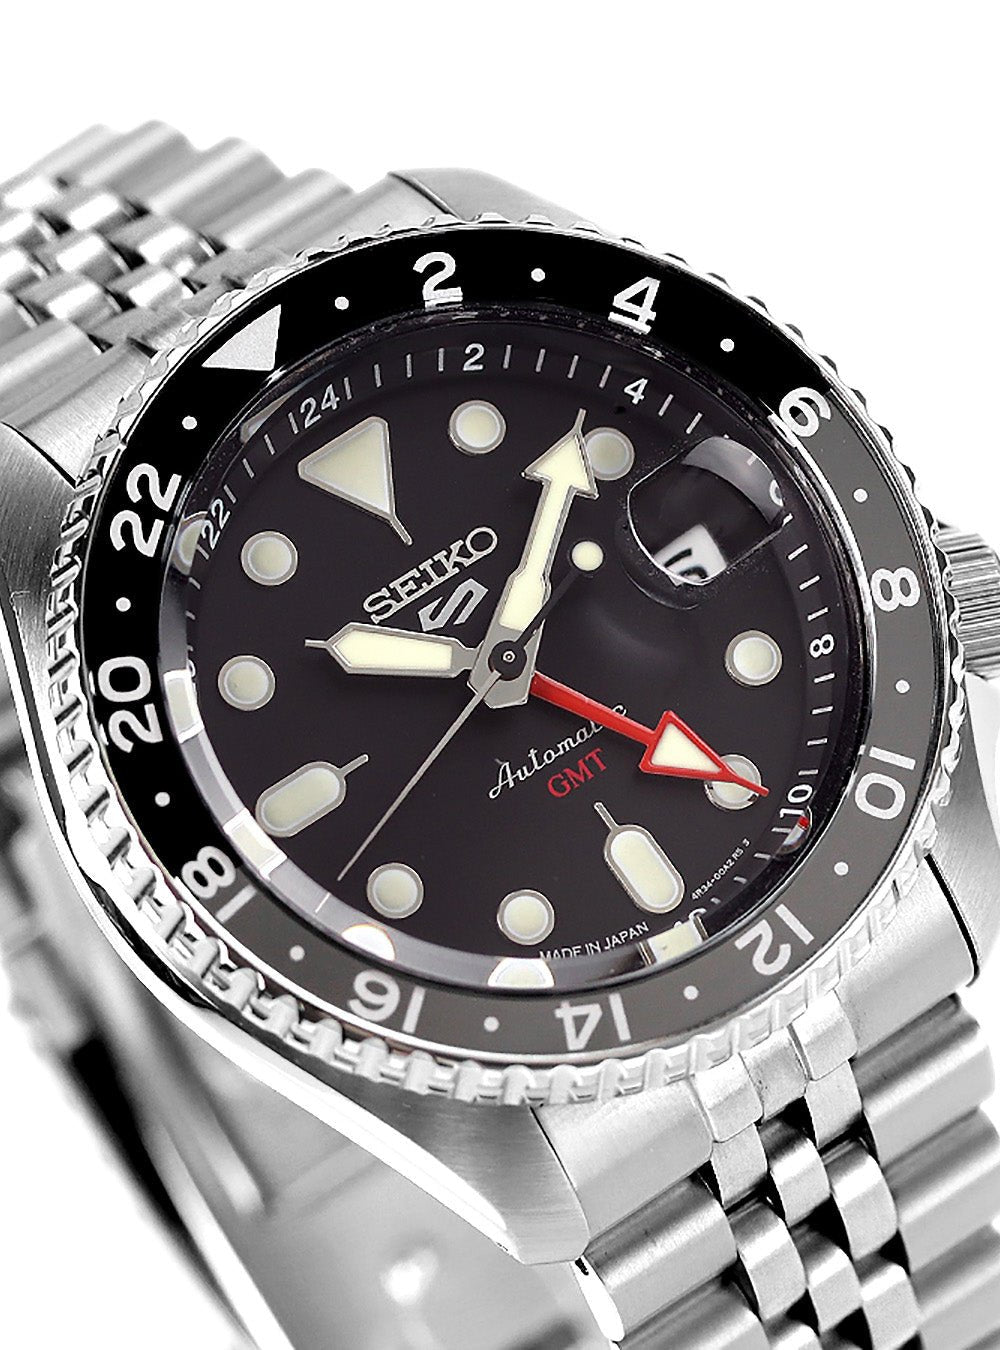 SEIKO 5 SPORTS SKX SPORTS STYLE GMT SBSC001 MADE IN JAPAN JDM